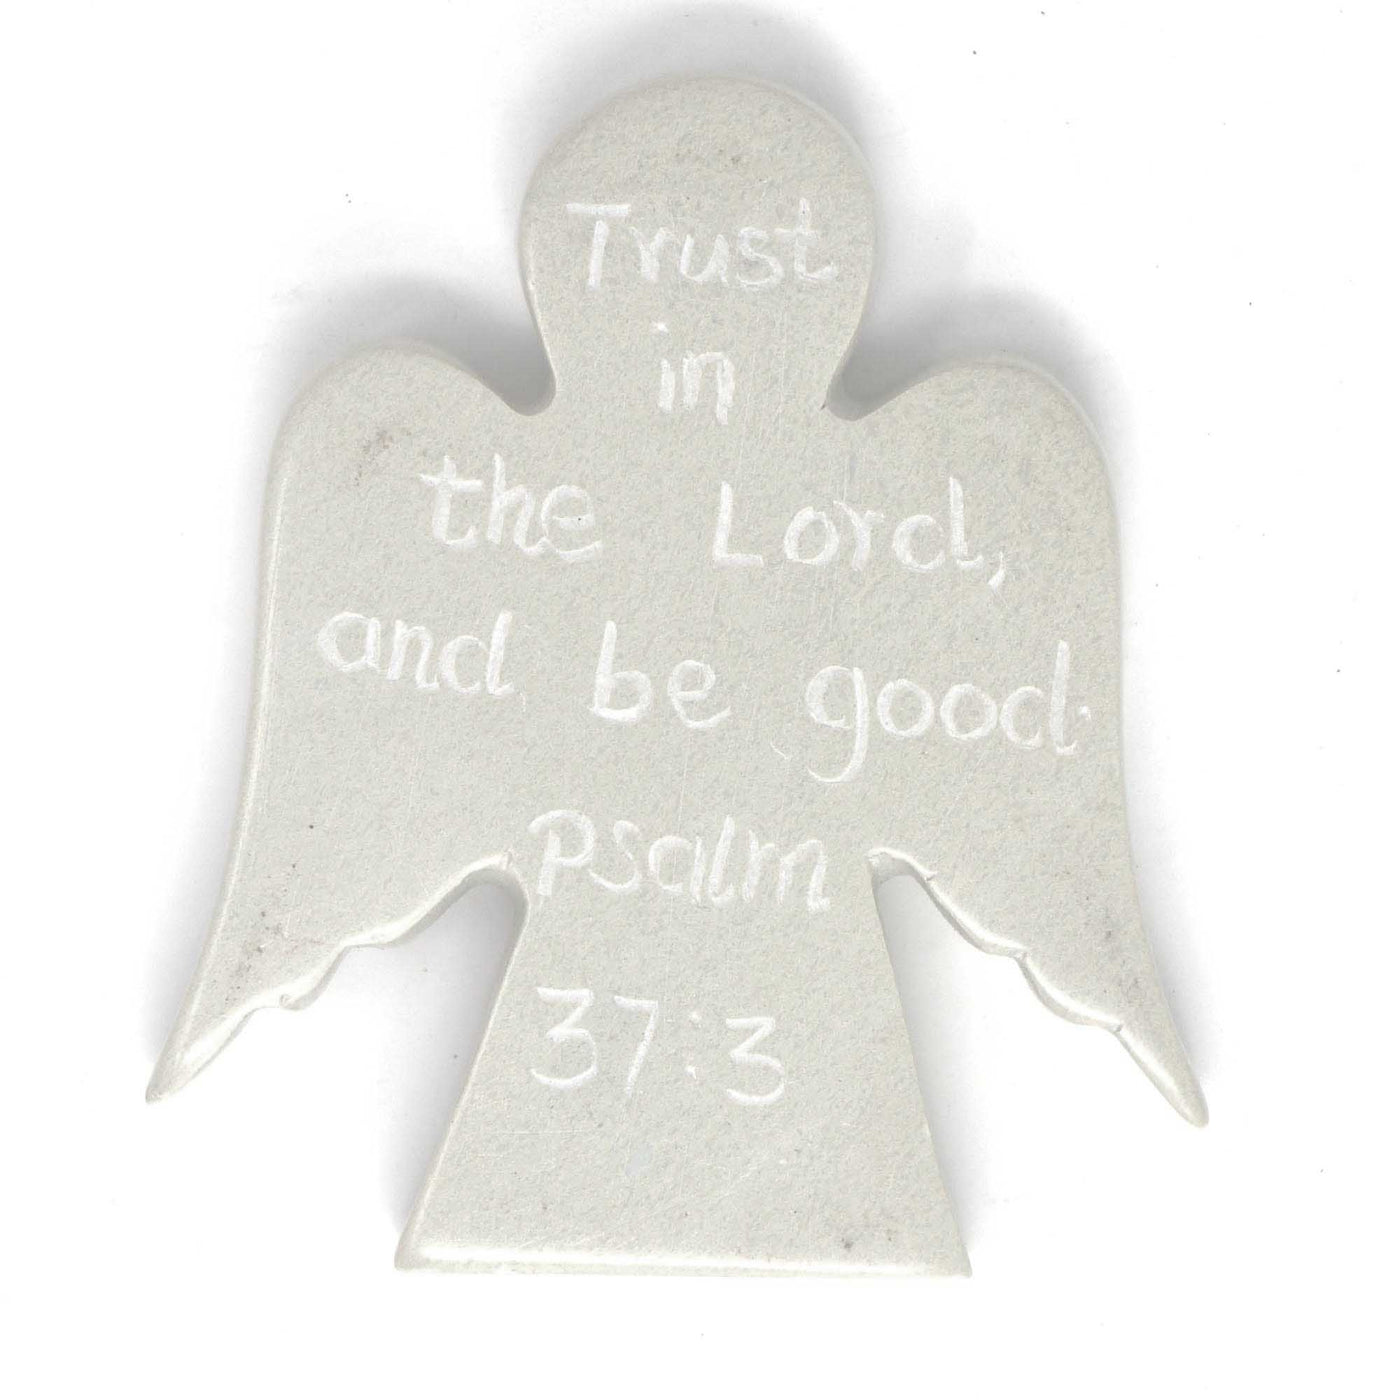 Angel Devotional Tokens with Psalm Inscriptions, Set of 2 - Yvonne’s 100th Wish Inc